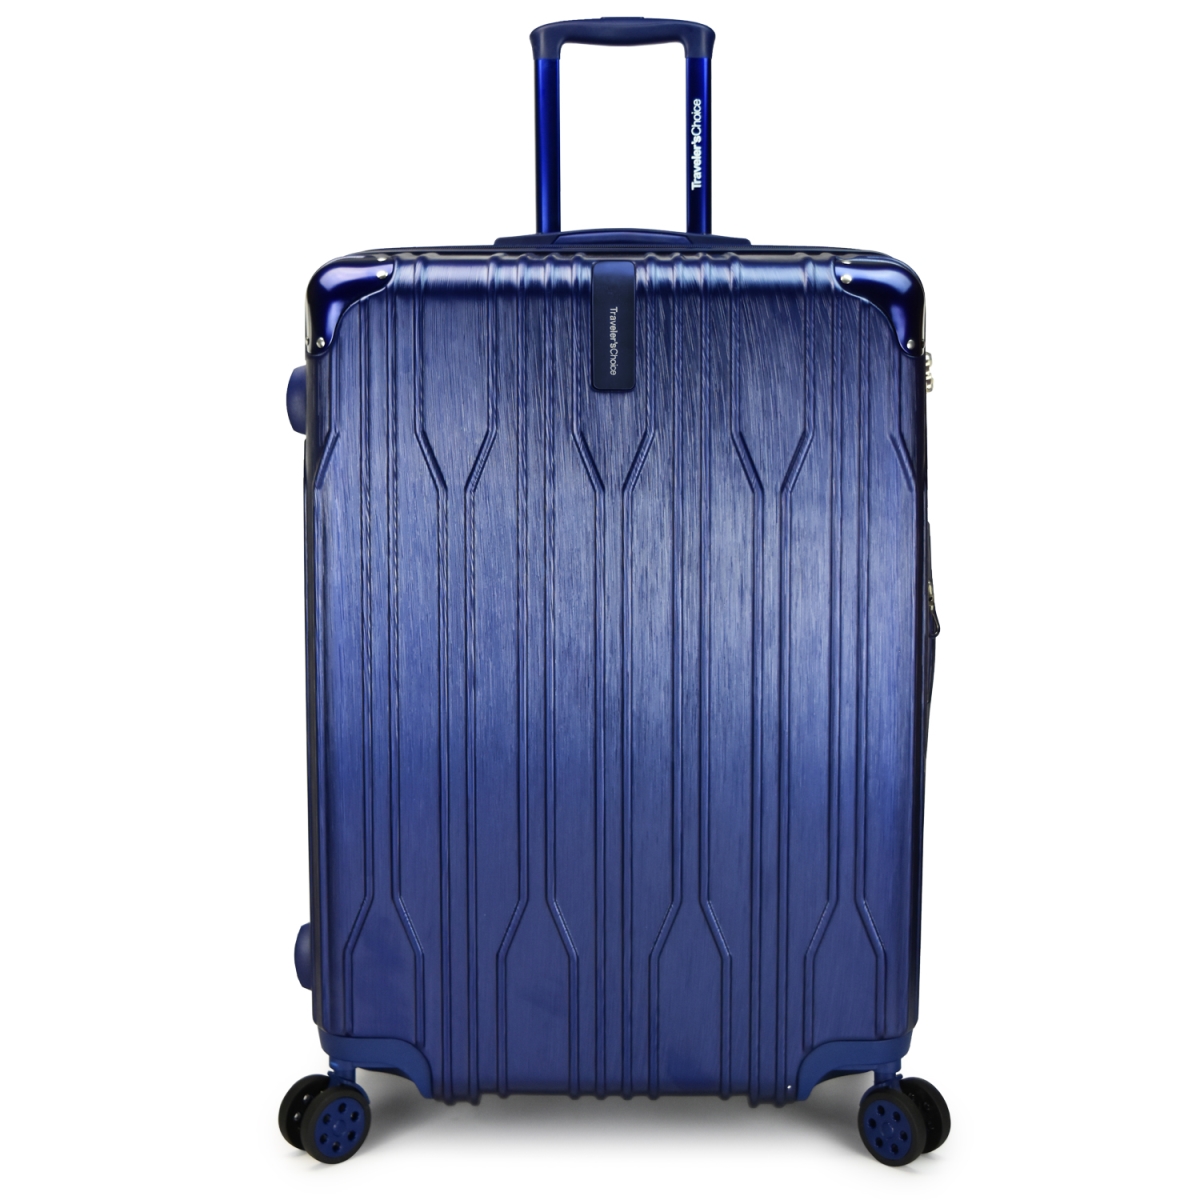 Travelers Choice Tc09035n28 Bell Weather Expandable 28 In. Spinner Luggage, Navy